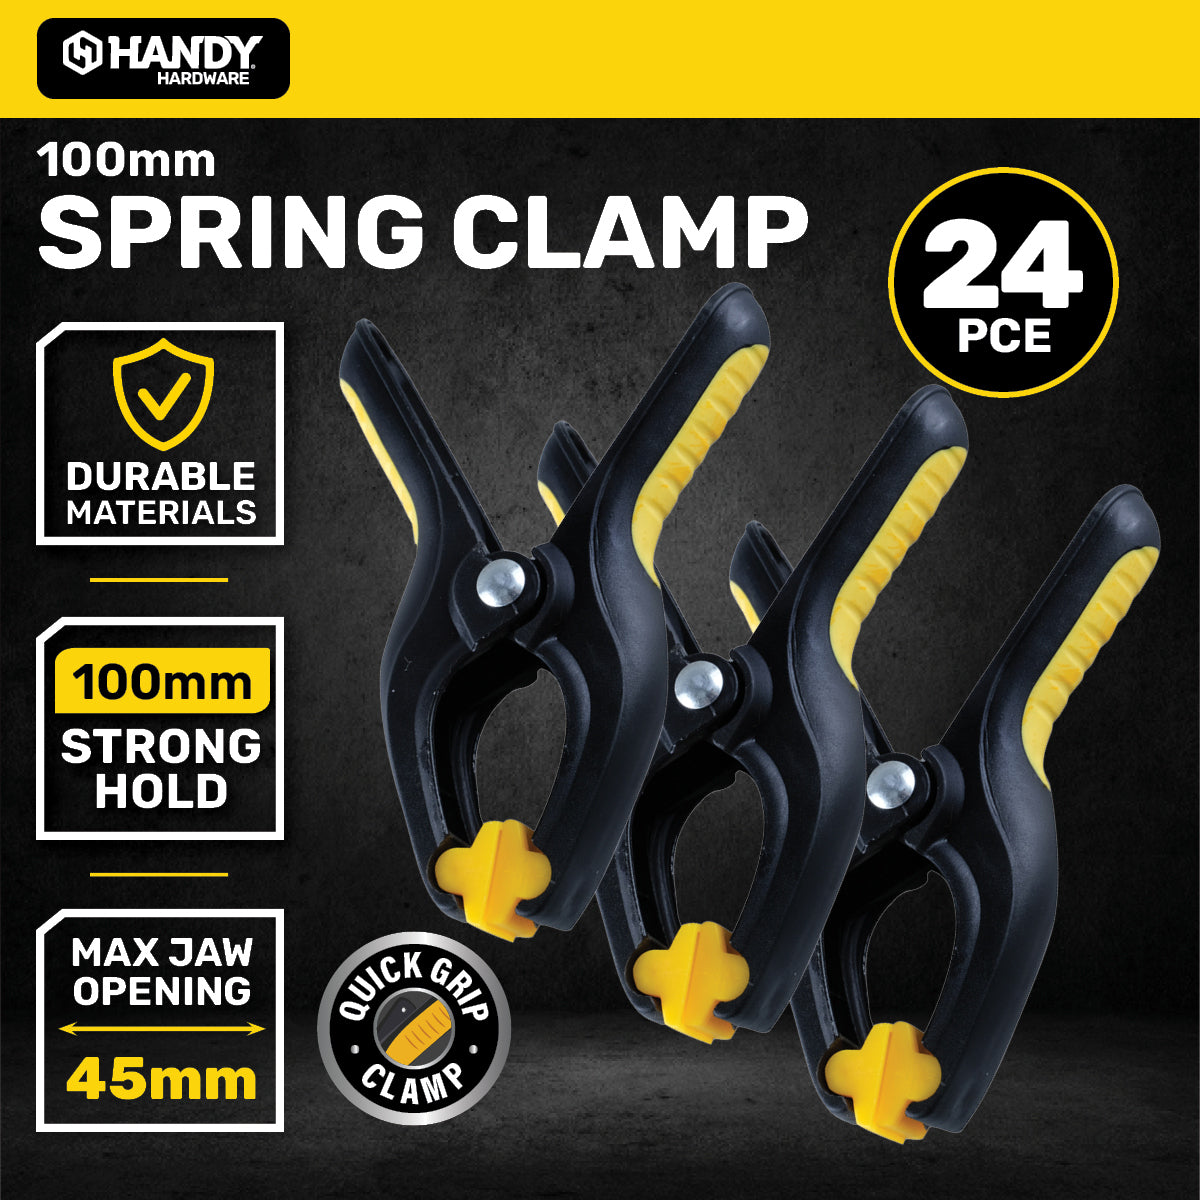 Handy Hardware 24PCE Medium Spring Clamps 45mm Jaw Opening Heavy Duty 100mm